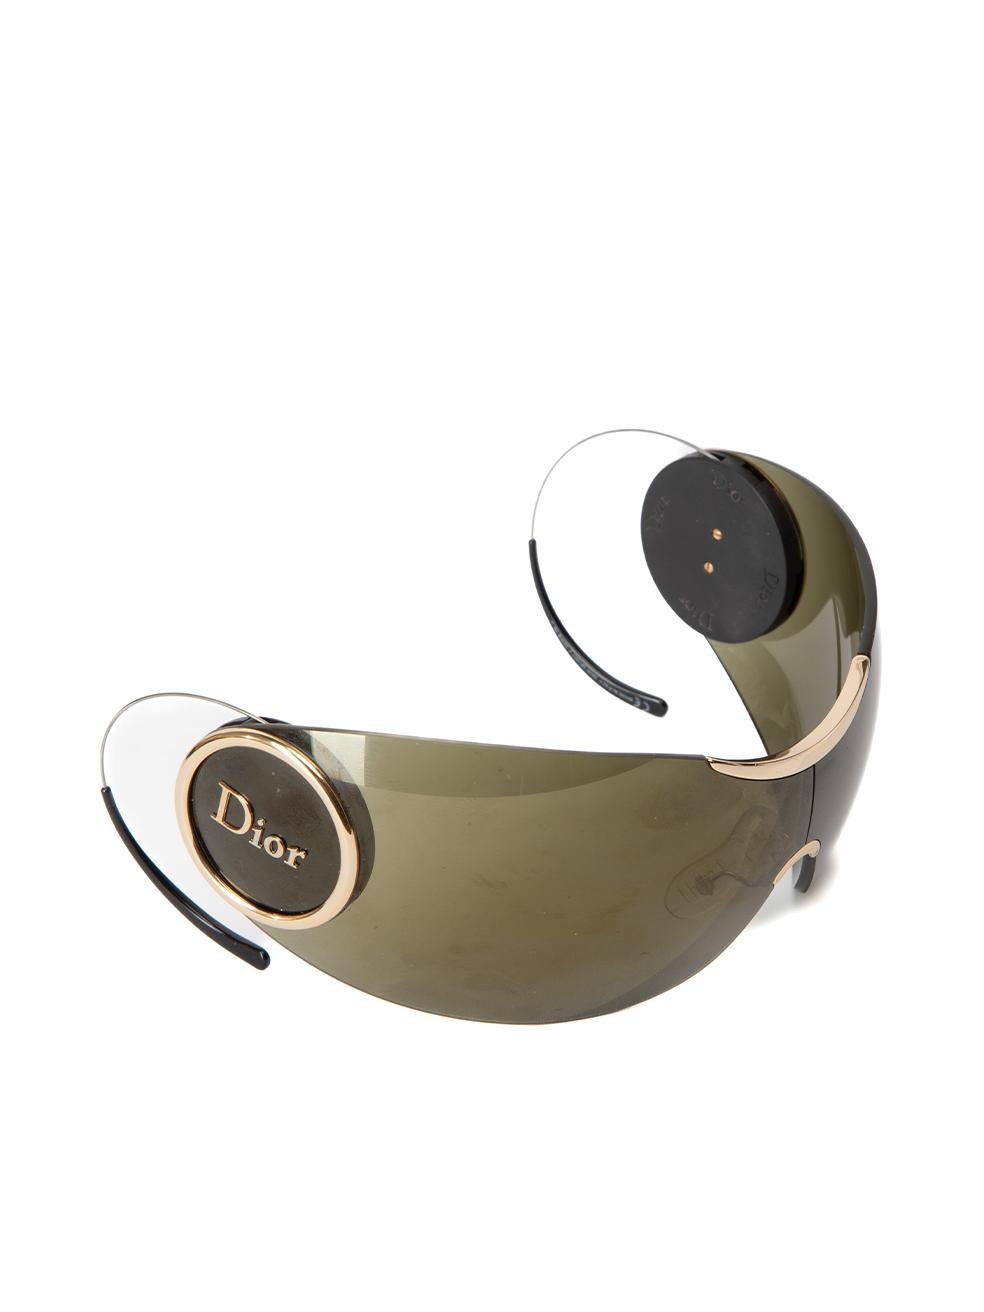 CONDITION is Very good. Minimal wear to sunglasses is evident. Minimal wear to Dior logo on the sides which are slightly discoloured on this used Dior designer resale item. This item includes the sunglasses case which has visible wear and scuffs to